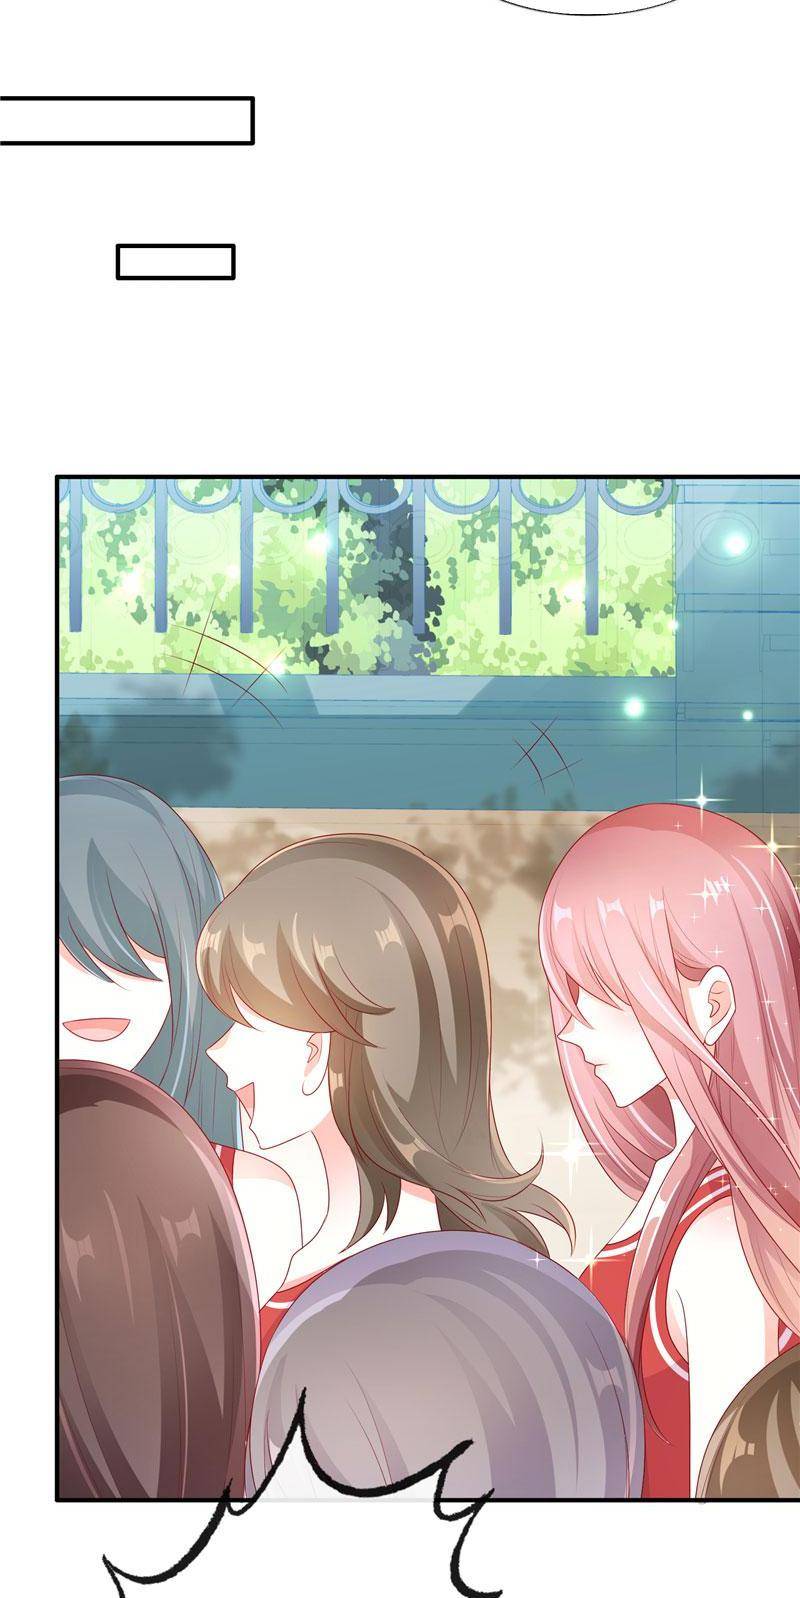 Her Smile So Sweet - chapter 29 - #4